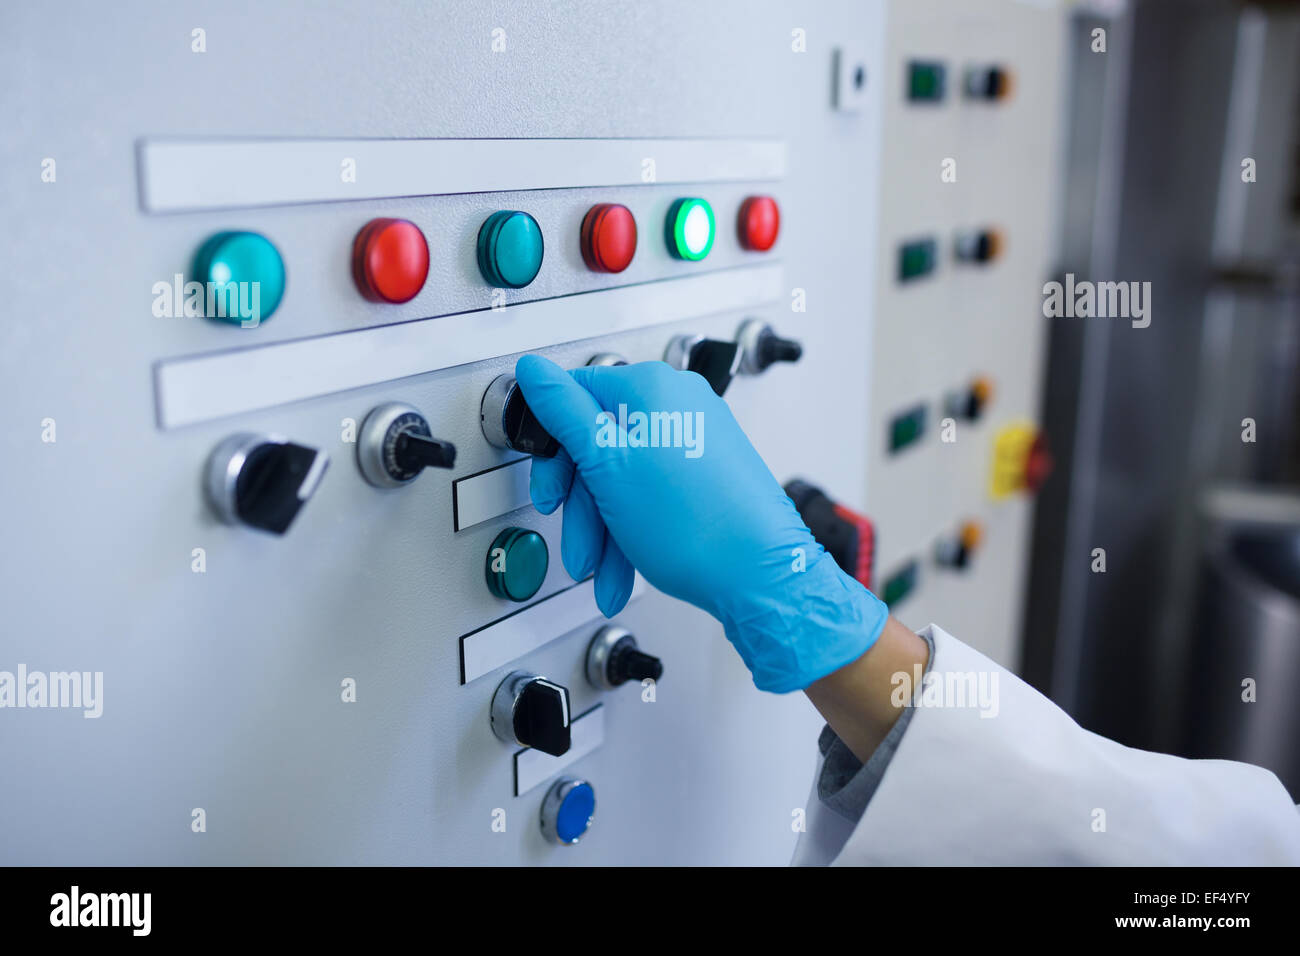 Hand with gloves turning buttons of the machine Stock Photo